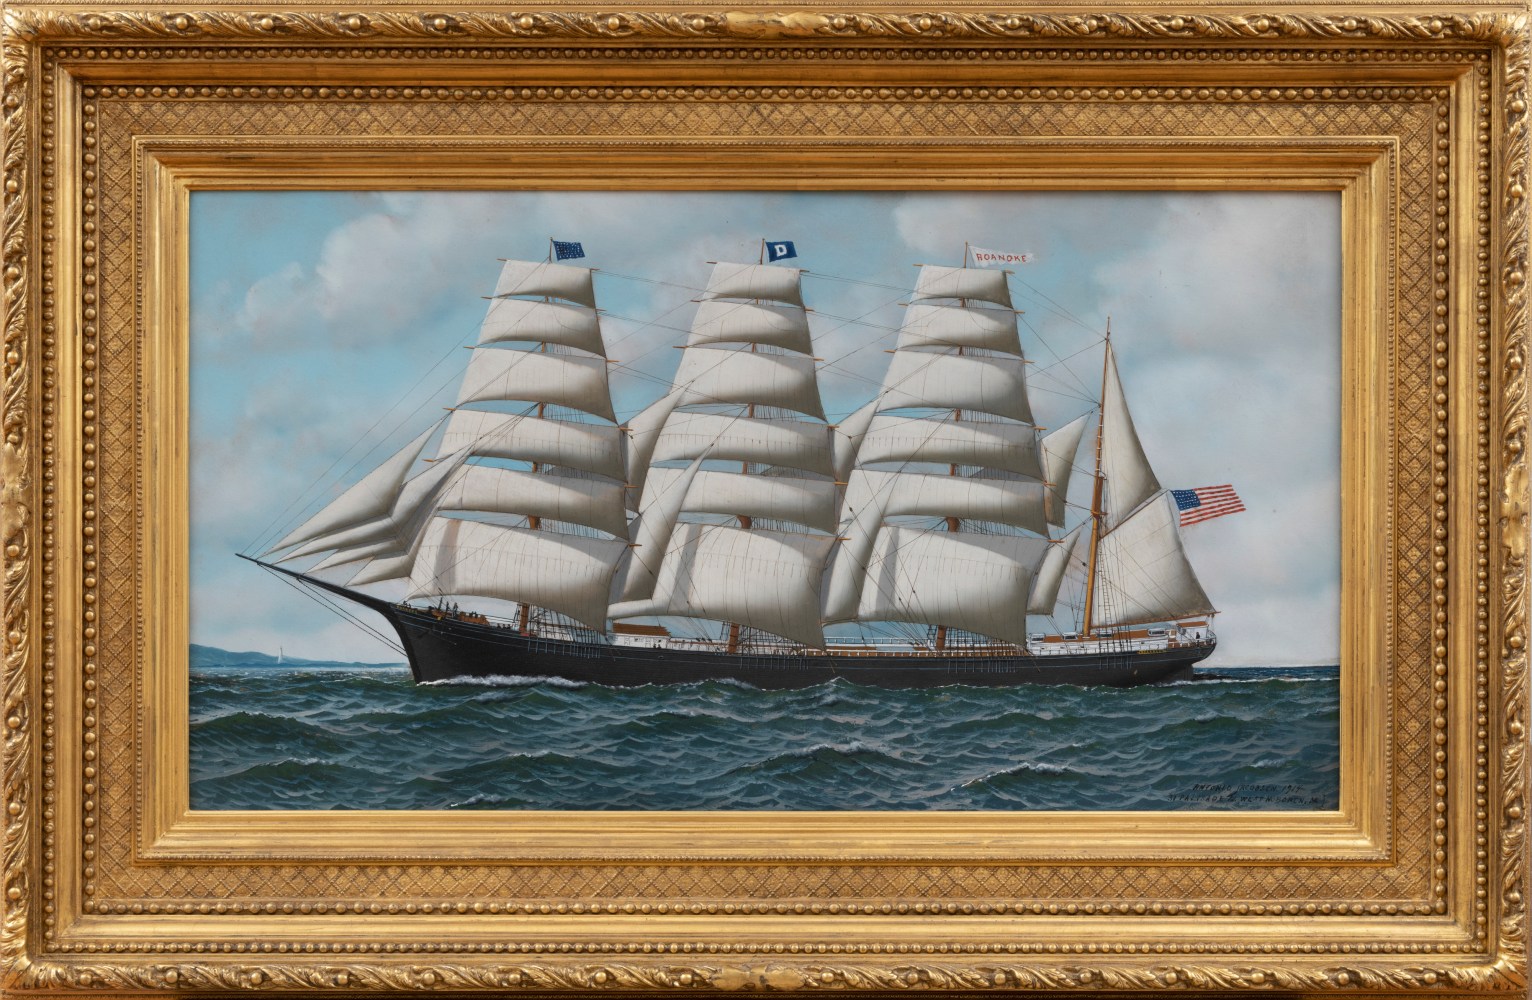 Antonio Jacobsen (1850–1921), The Four Masted Barque Roanoke Under Full Sail, 1914, oil on board, 19 1/2 x 35 1/2 in., signed, dated and inscribed lower right: Antonio Jacobsen 1914/ 31 Palisade Av. West Hoboken. NJ (framed)